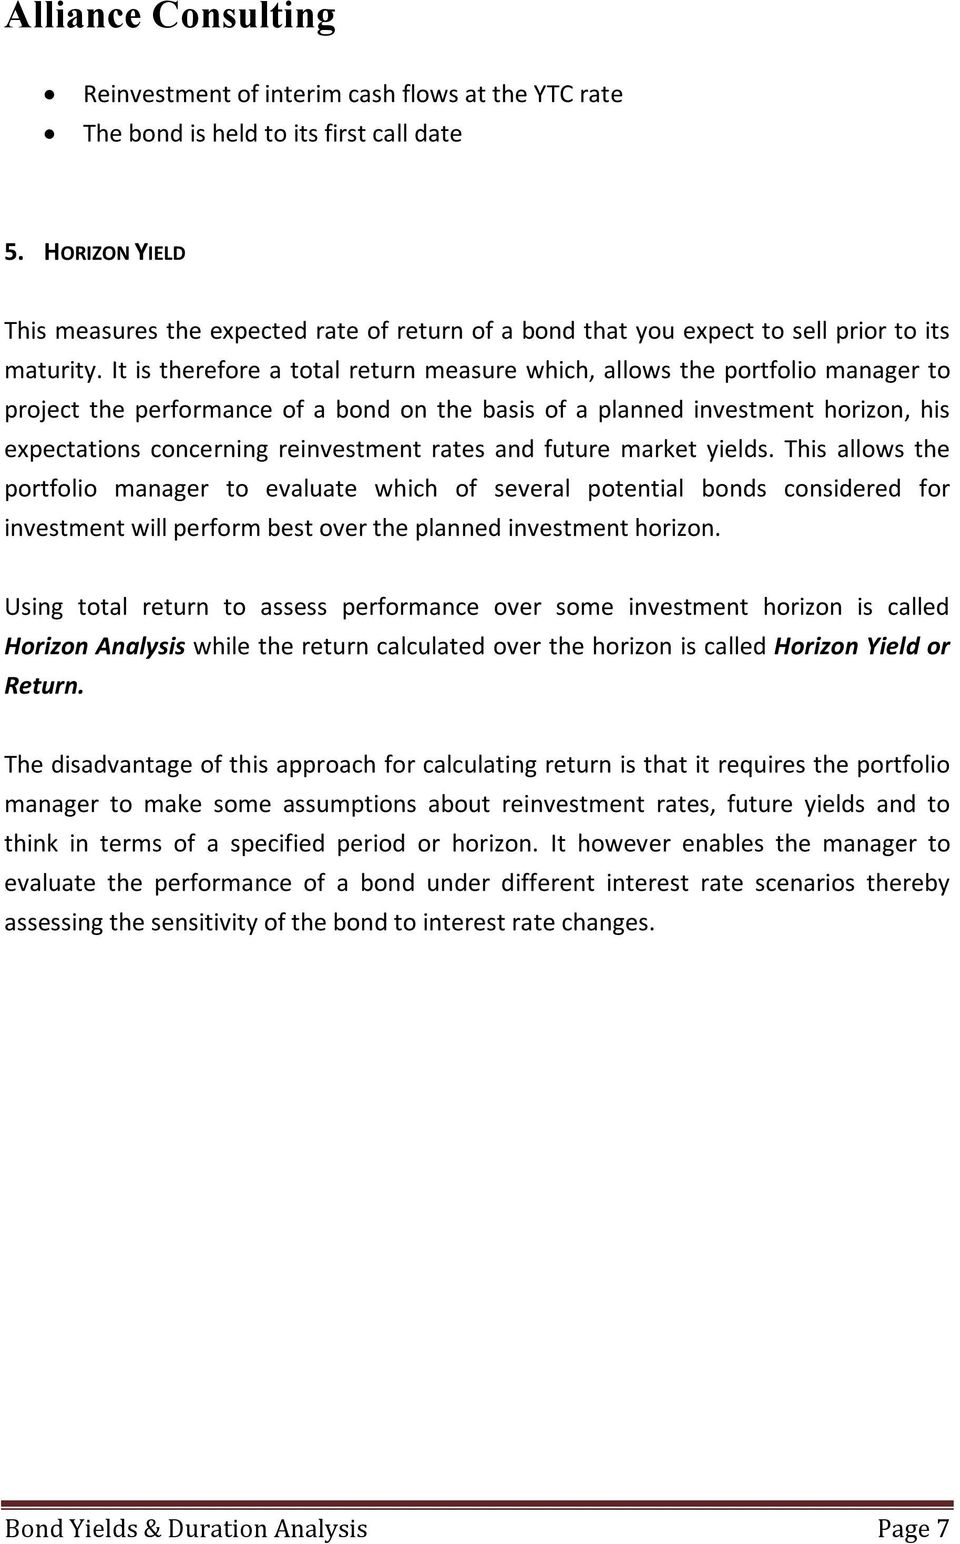 It is therefore a total return measure which, allows the portfolio manager to project the performance of a bond on the basis of a planned investment horizon, his expectations concerning reinvestment